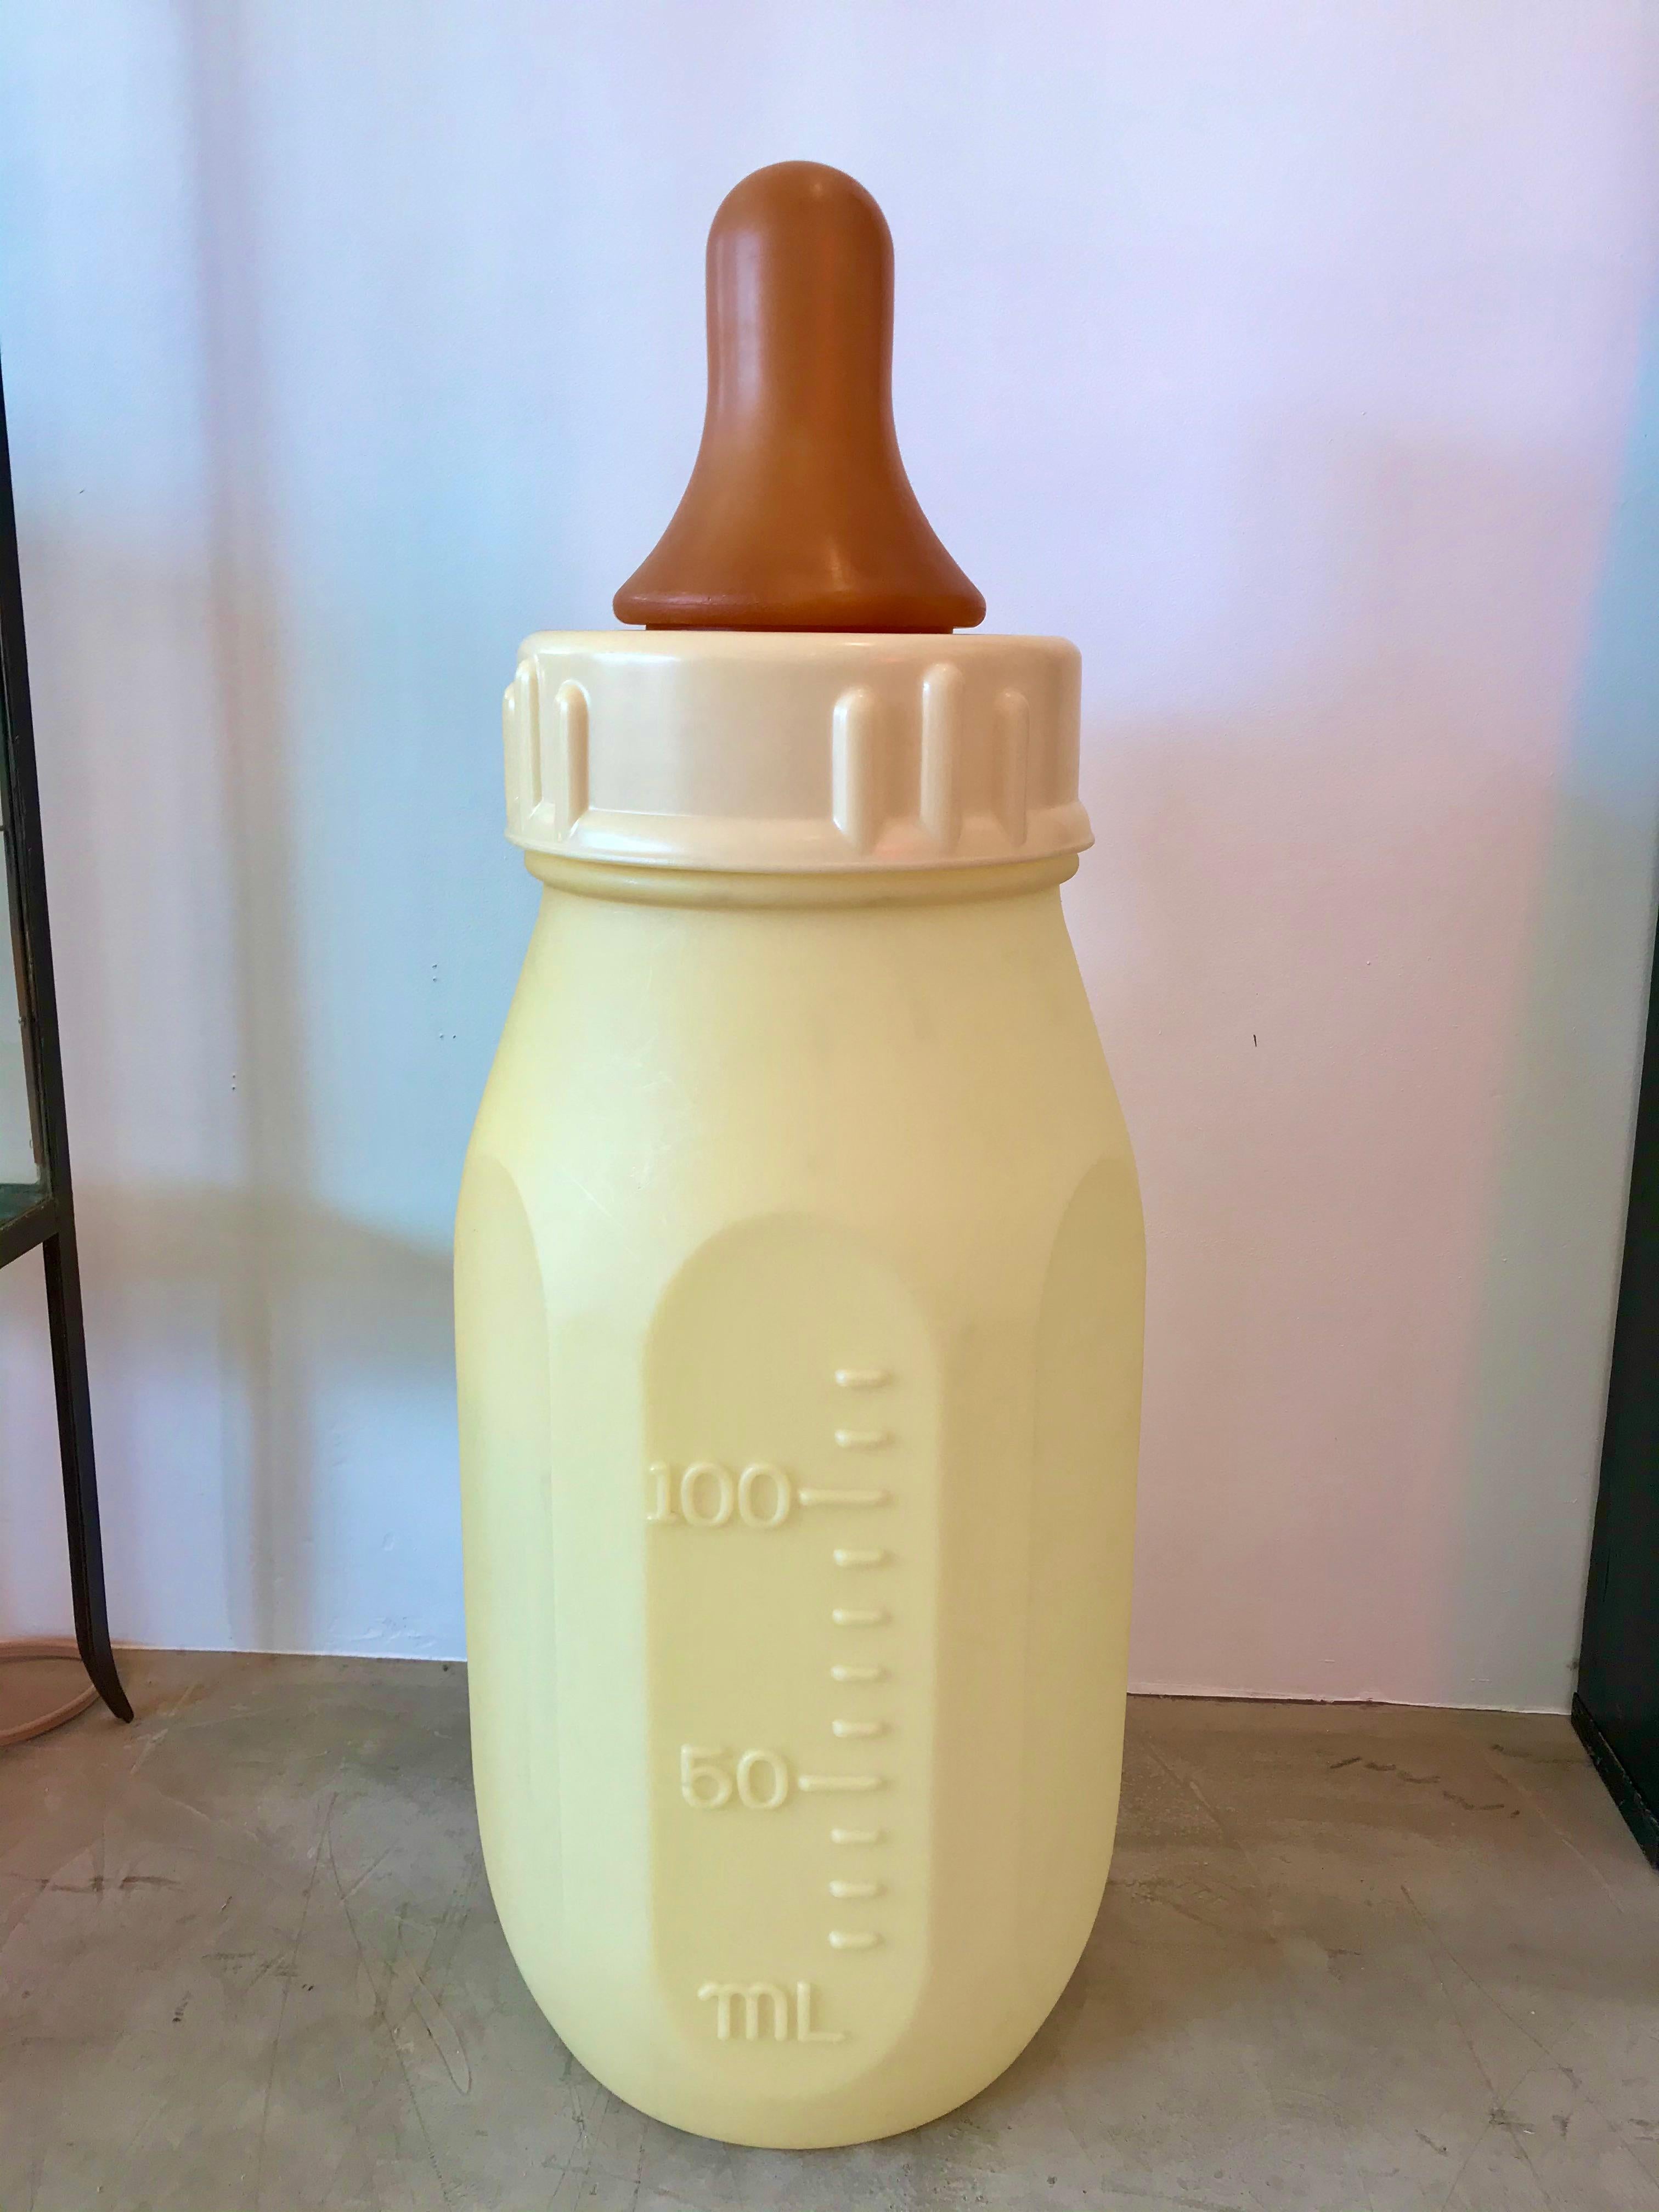 Gigantic baby bottle made in the 1970s. Hard plastic bottle with removable top and rubber nipple. Pale light yellow bottle with ounces on one side and milliliters on the other. At three and a half feet tall and 15